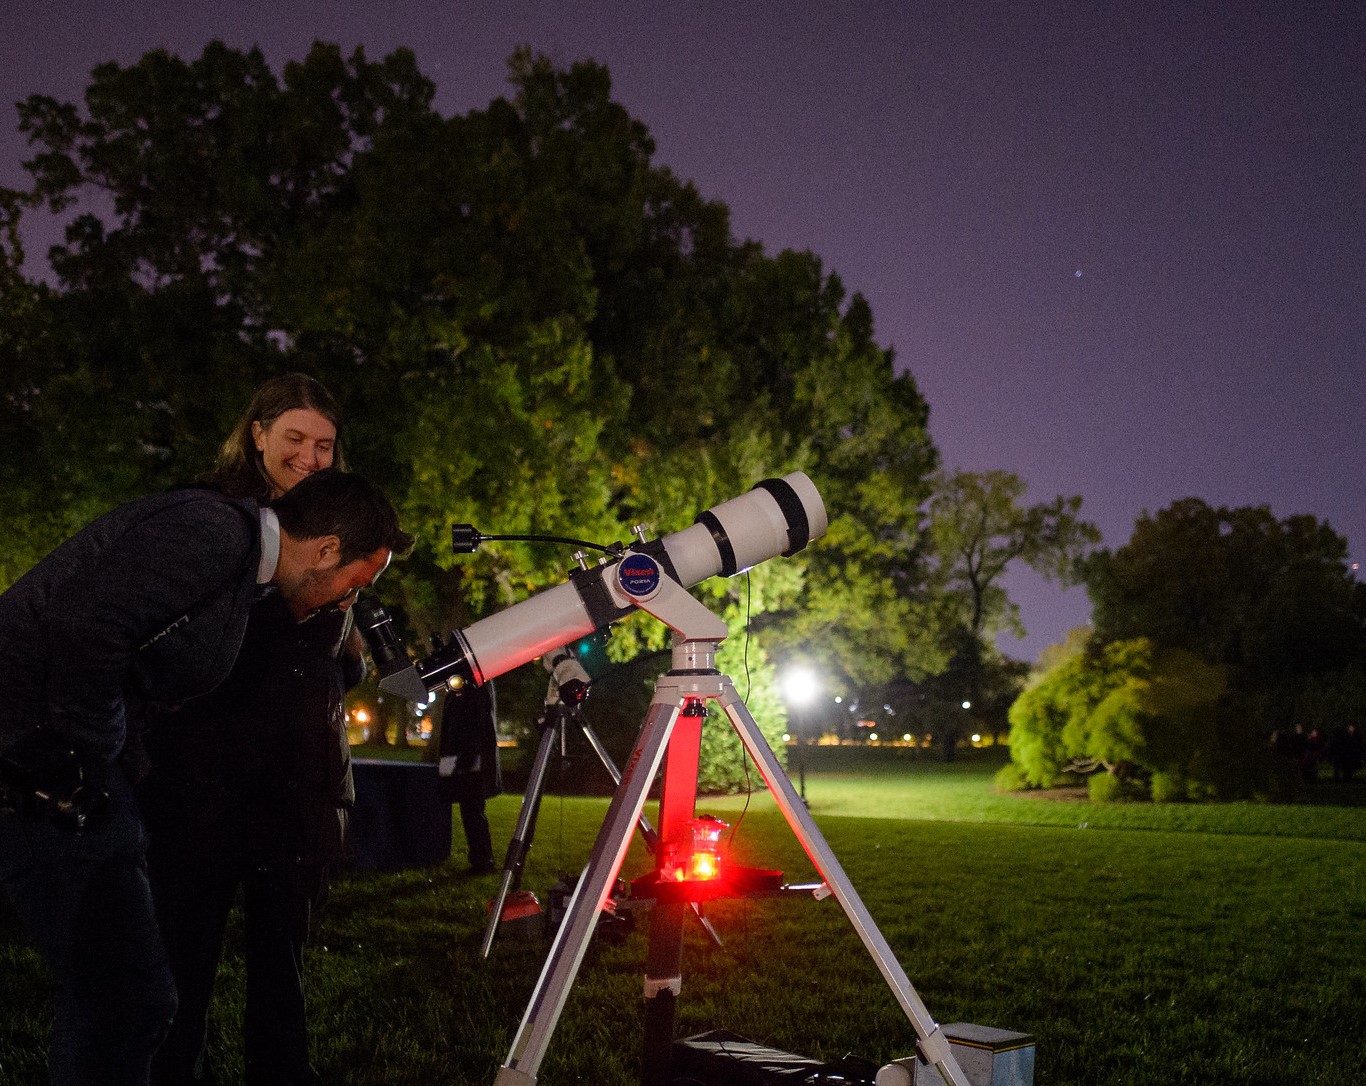 A man and woman look through a white telescope during a night sky event. The area they are in is well manicured park setting with grass and trees. Distant street lights glow in the night sky.